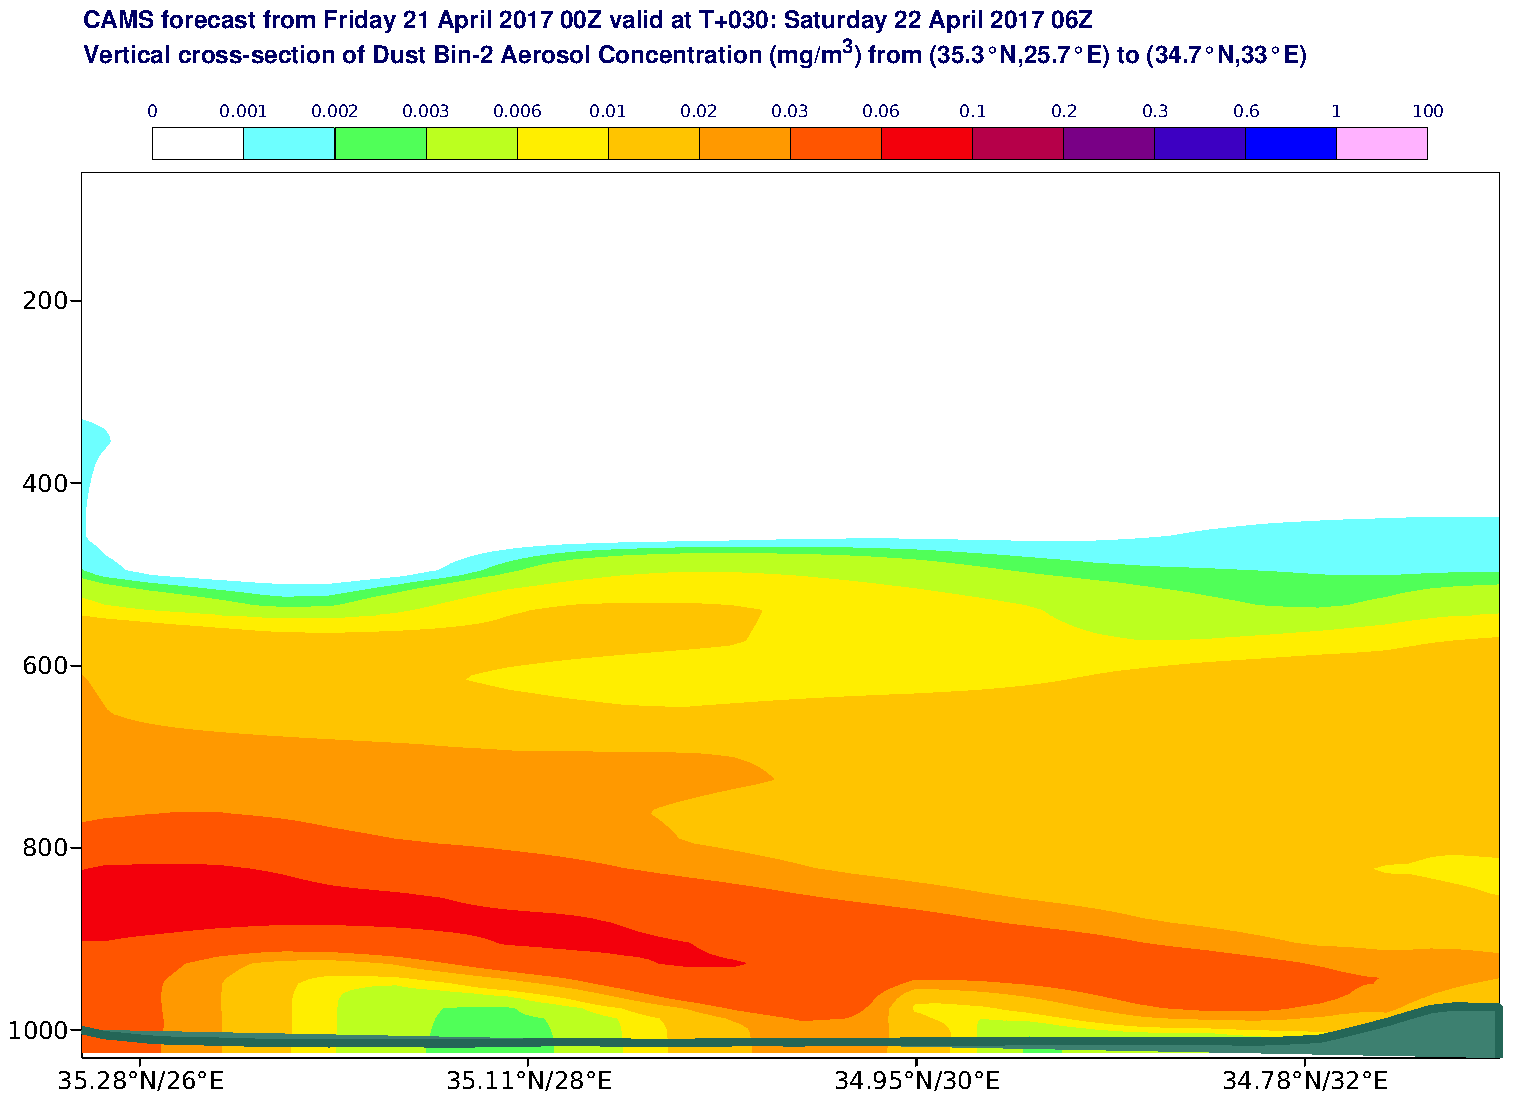 Vertical cross-section of Dust Bin-2 Aerosol Concentration (mg/m3) valid at T30 - 2017-04-22 06:00